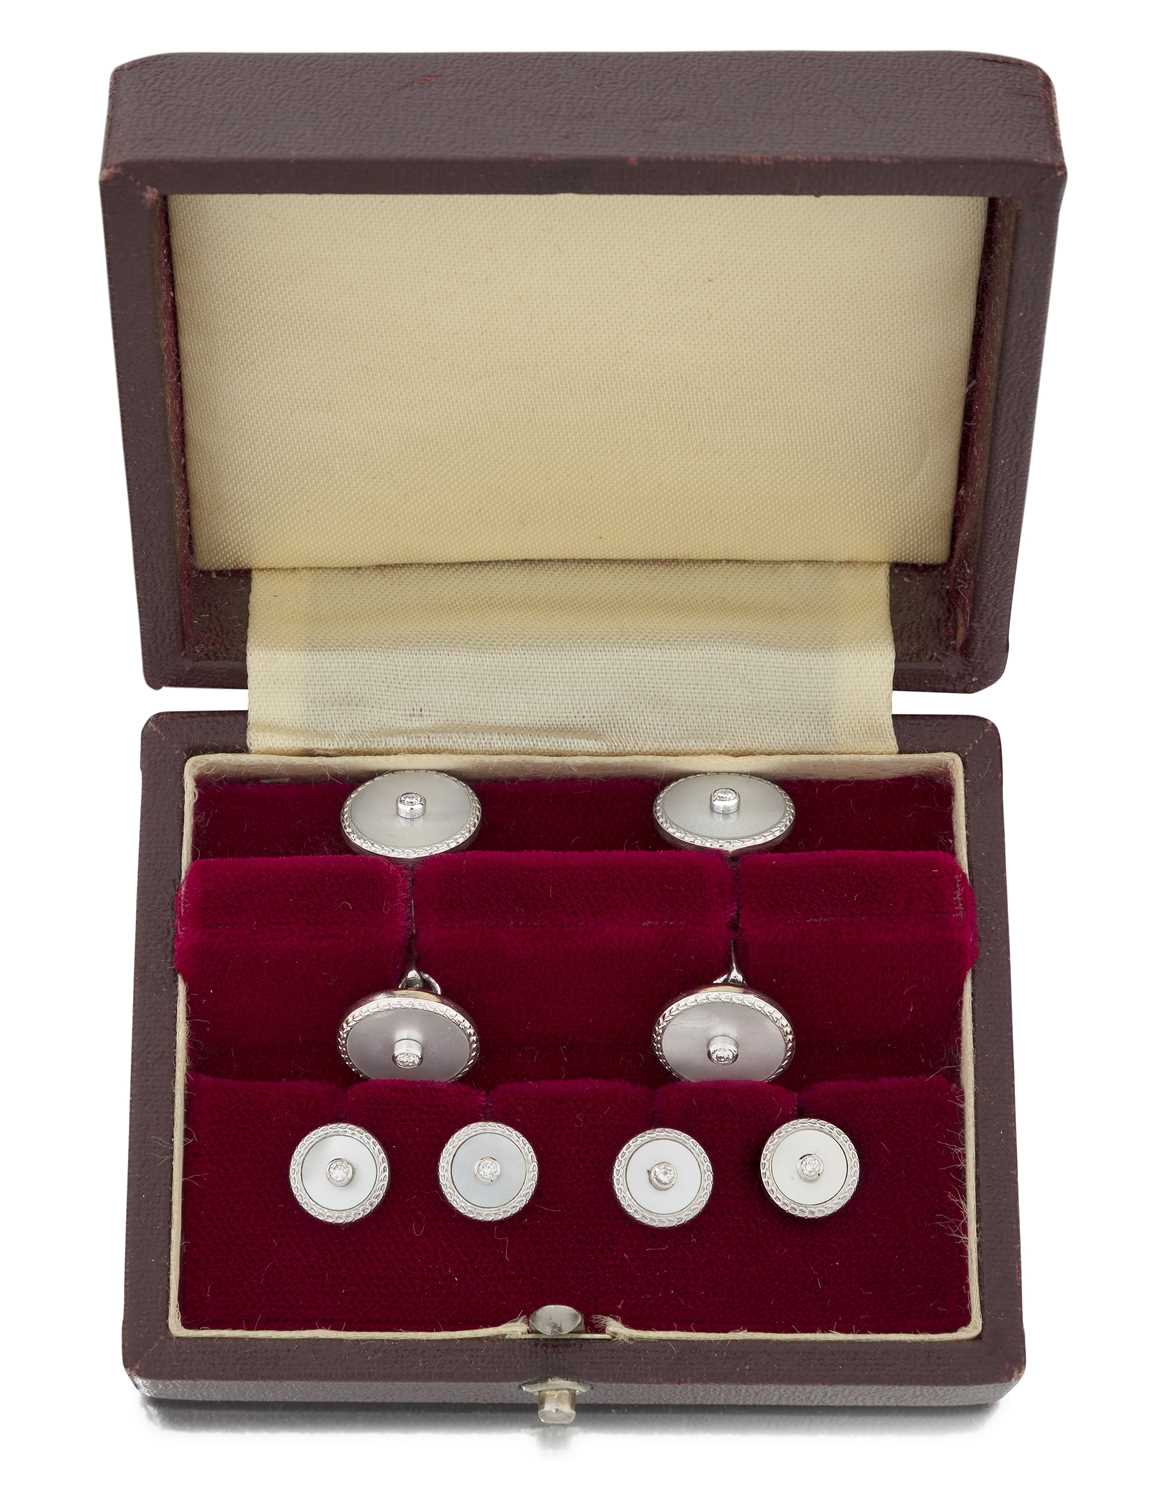 Lot 2176 - An 18 Carat White Gold Diamond and Mother-of-Pearl Dress Stud and Cufflink Suite